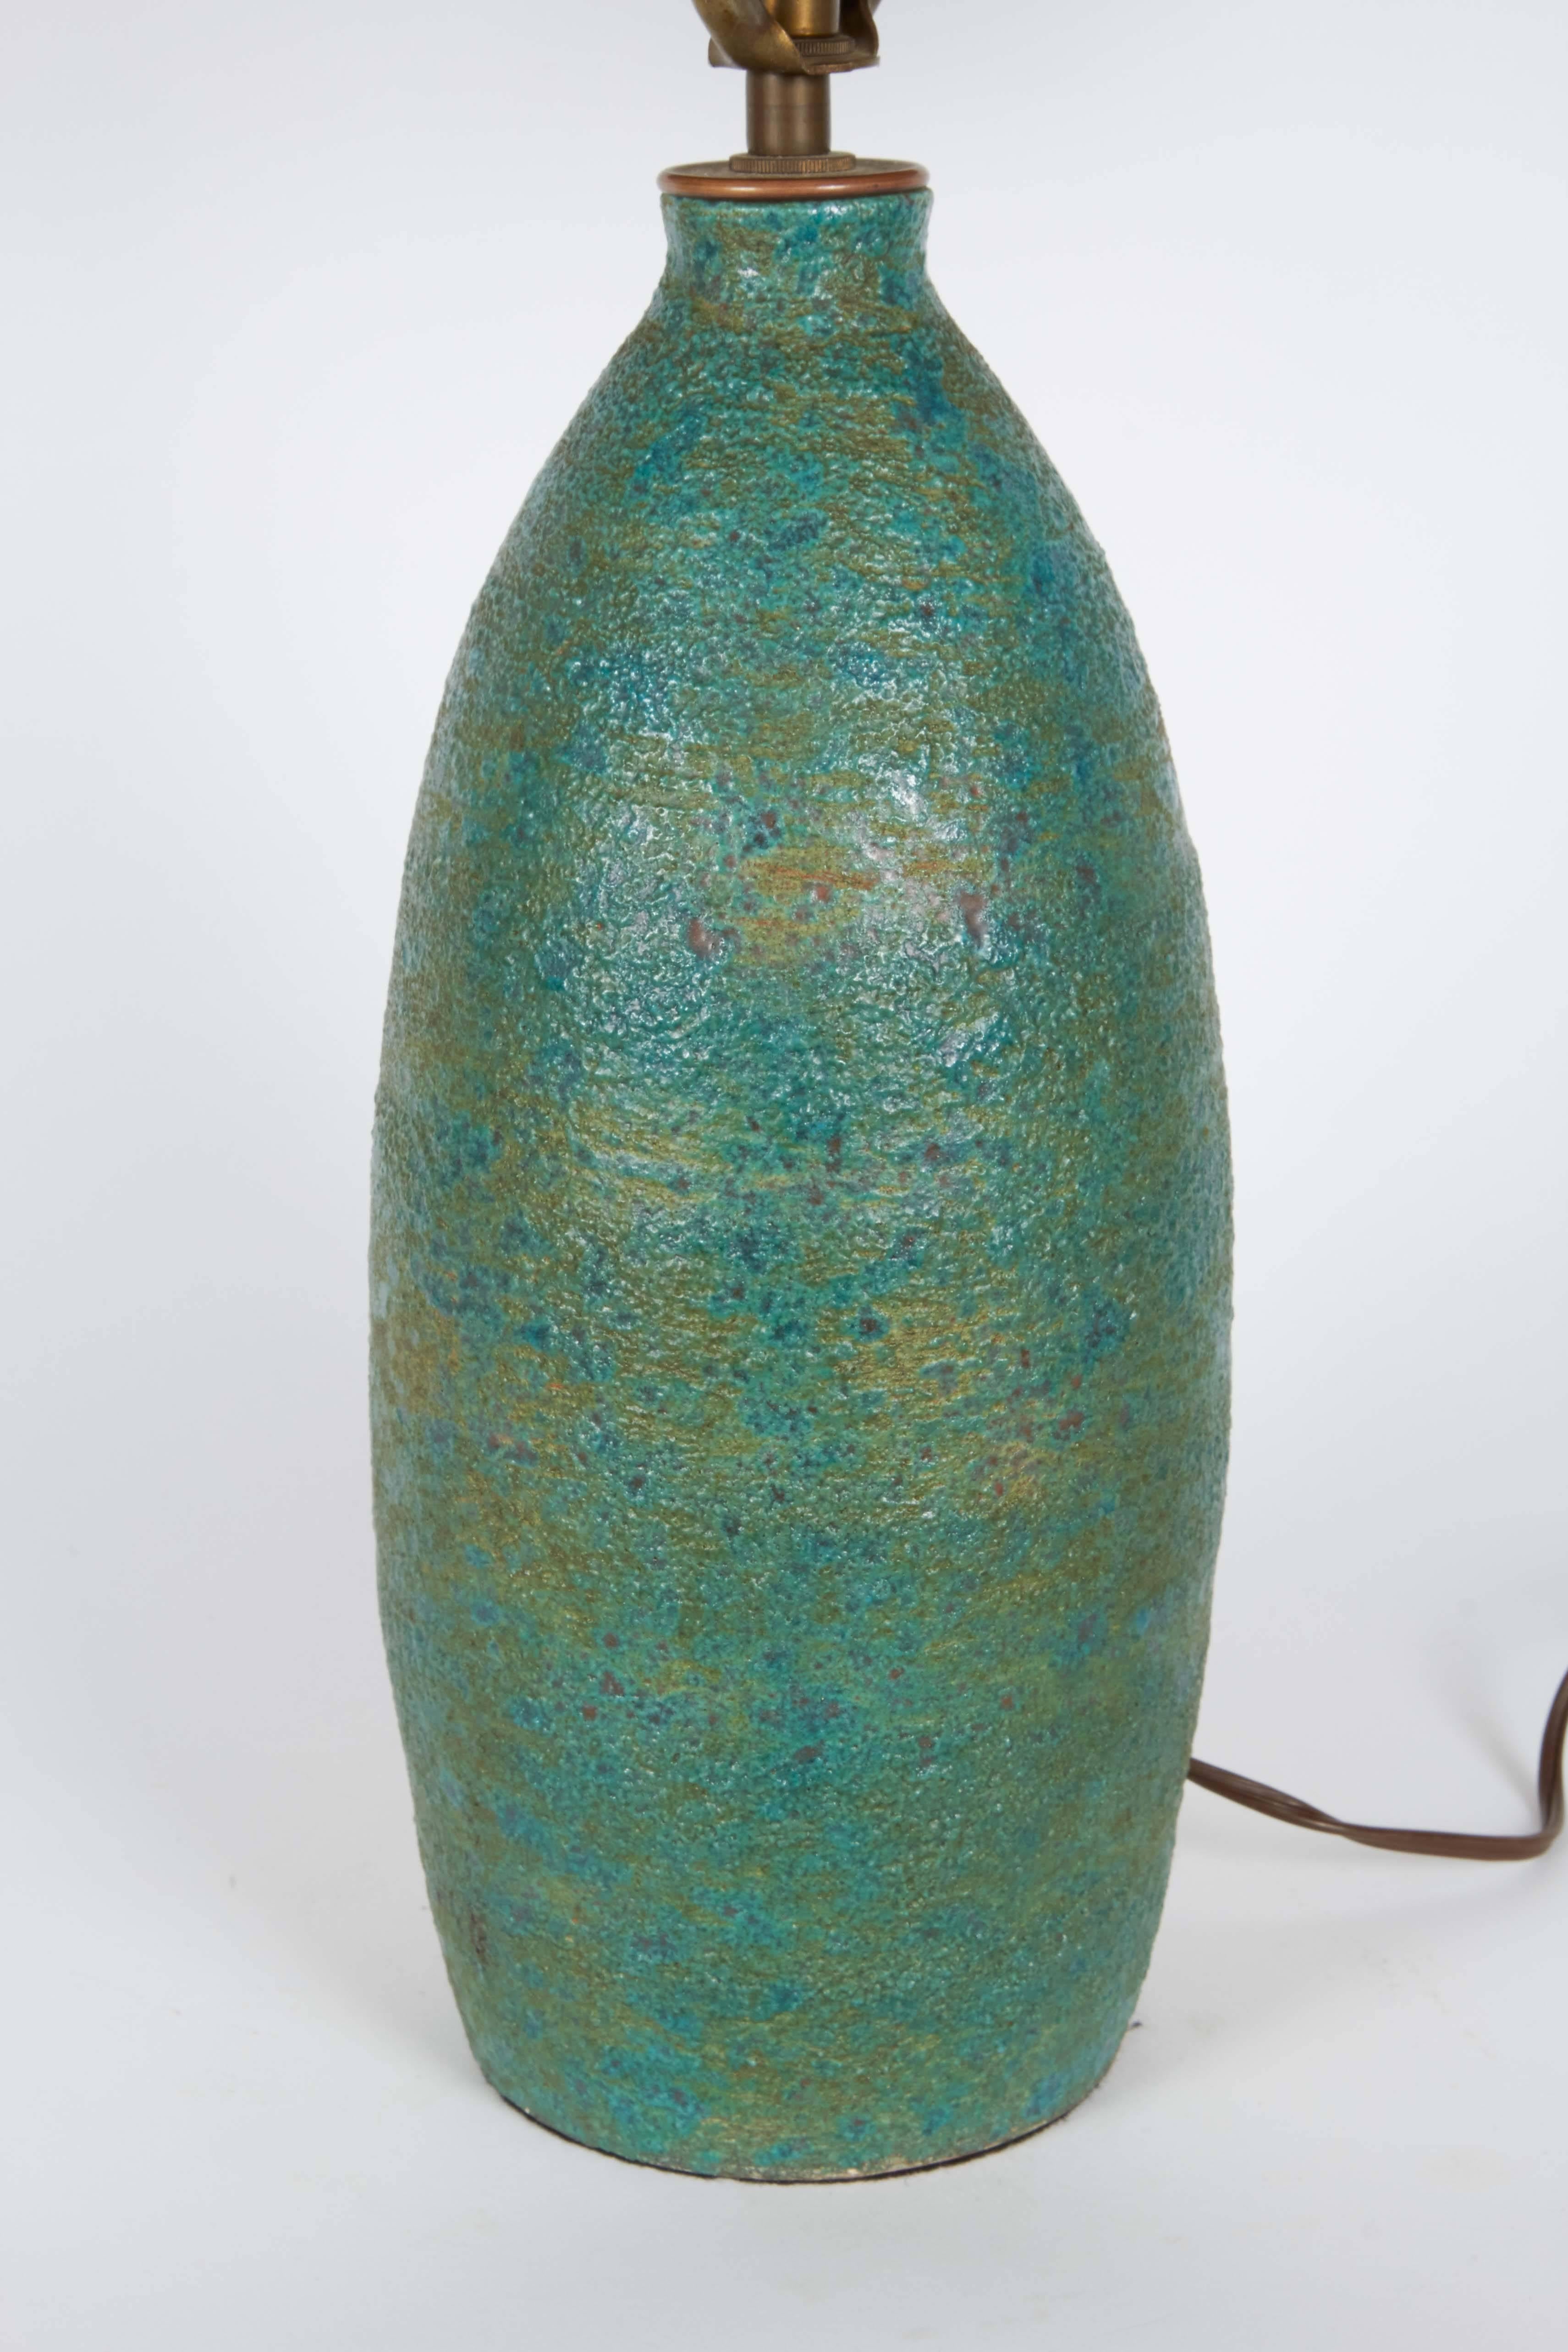 A pottery lamp with single socket on rounded body with teal lava glaze, circa 1960s. Wiring and socket to US standard. This lamp remains in very good vintage condition, wear consistent with age and use.